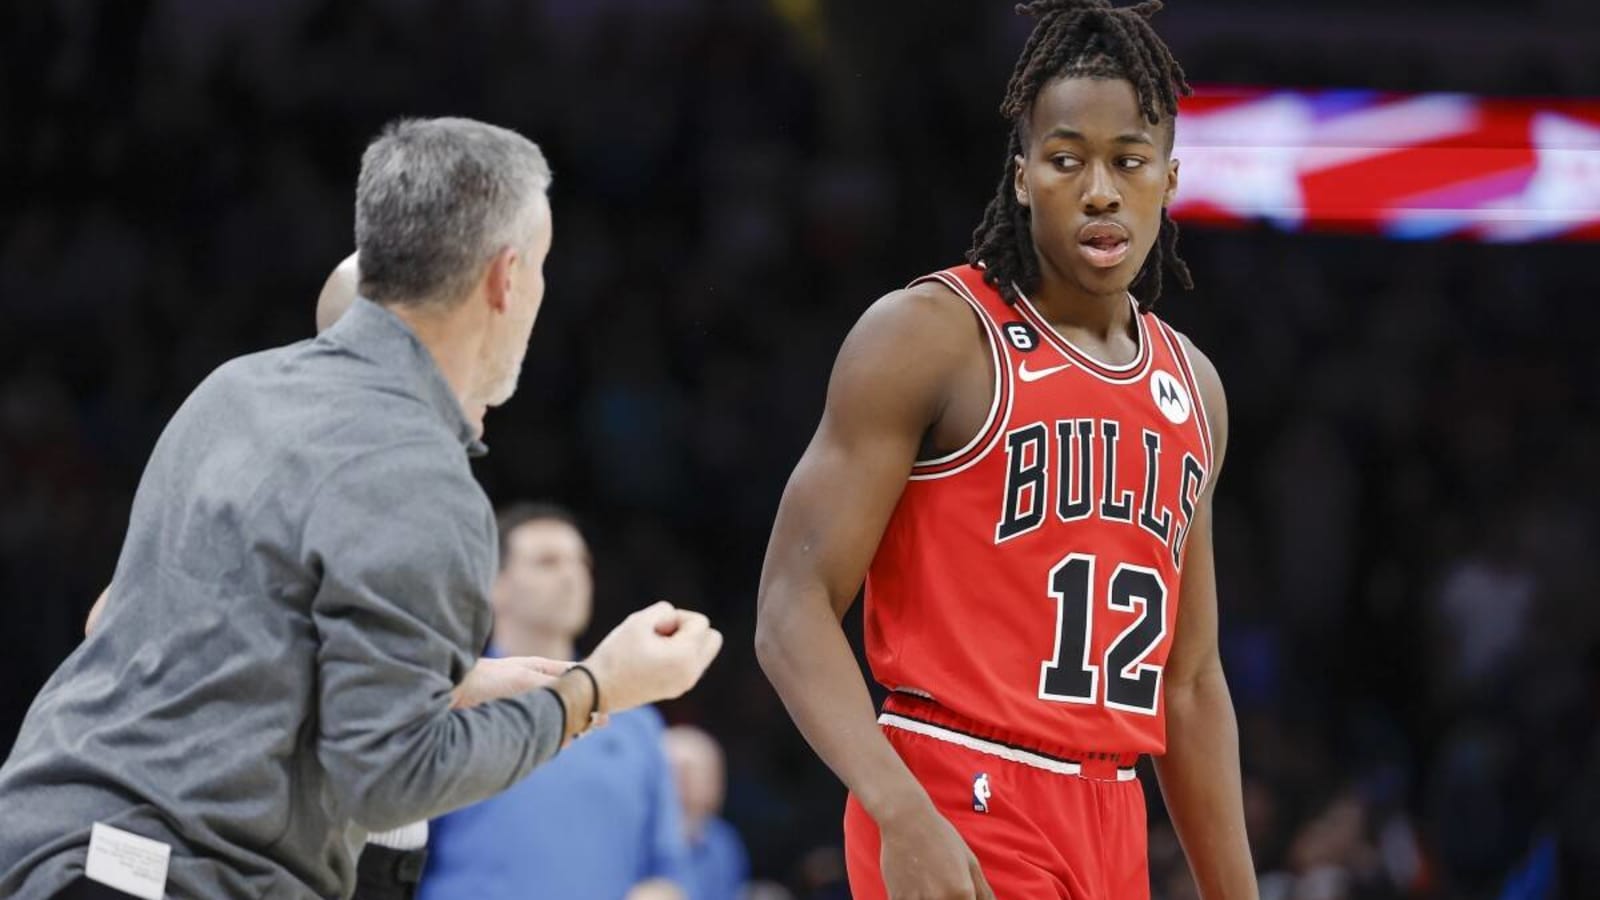 Billy Donovan praises Ayo Dosunmu for his heads-up plays in overtime